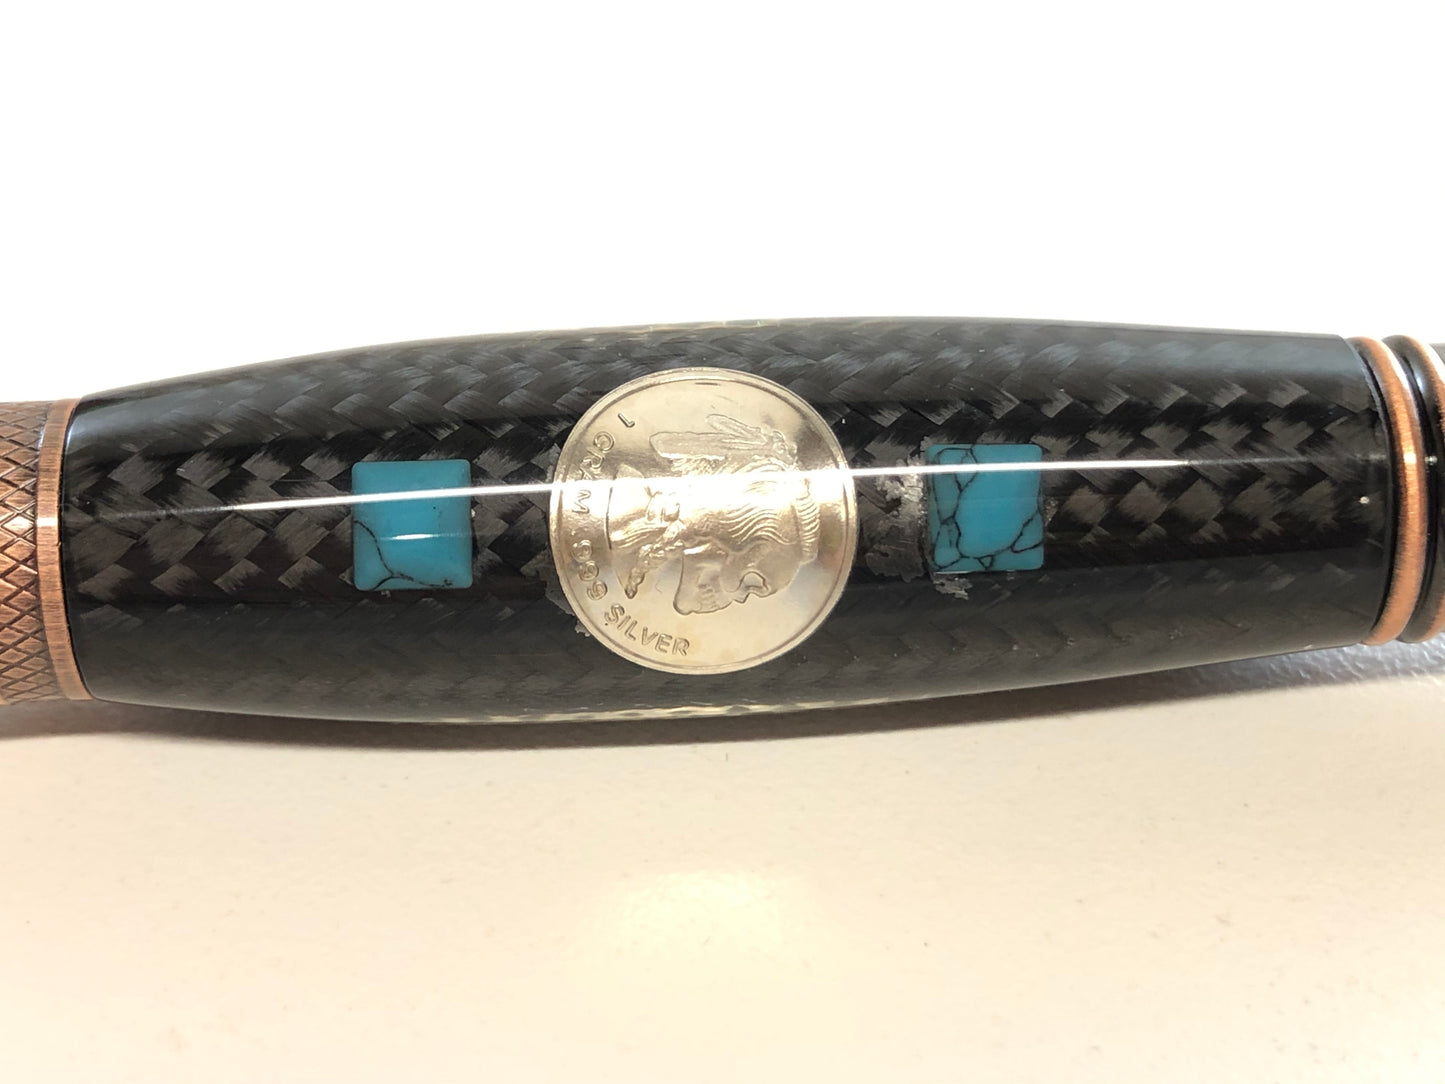 Monarch Grande / Gunmetal and Antique Copper - Carbon Fiber w/Turquoise and Silver Ingot